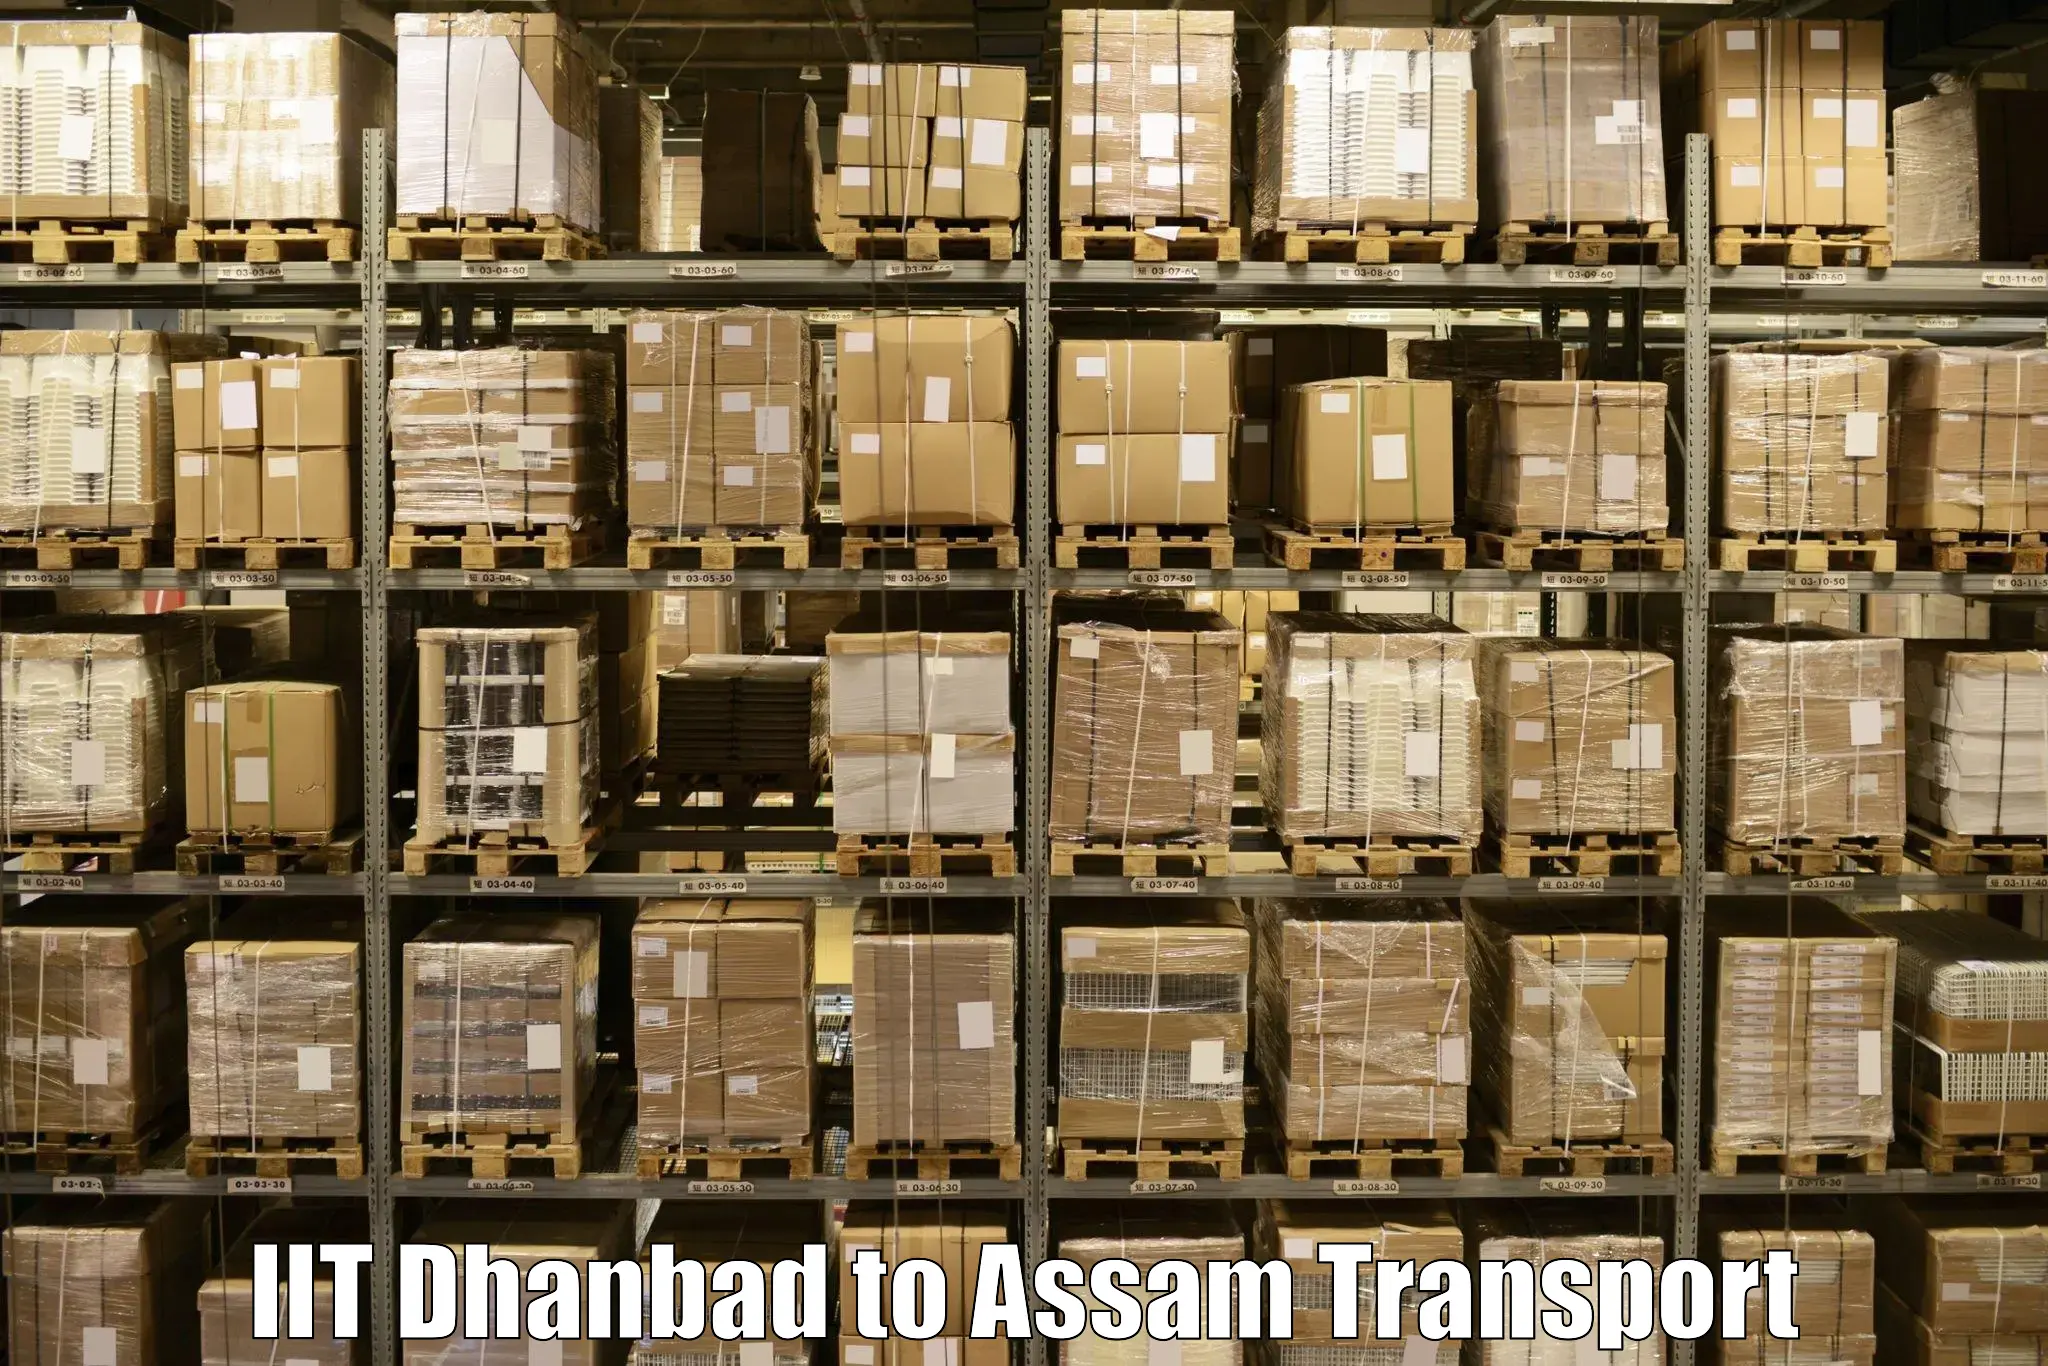 Daily parcel service transport IIT Dhanbad to Rupai Siding